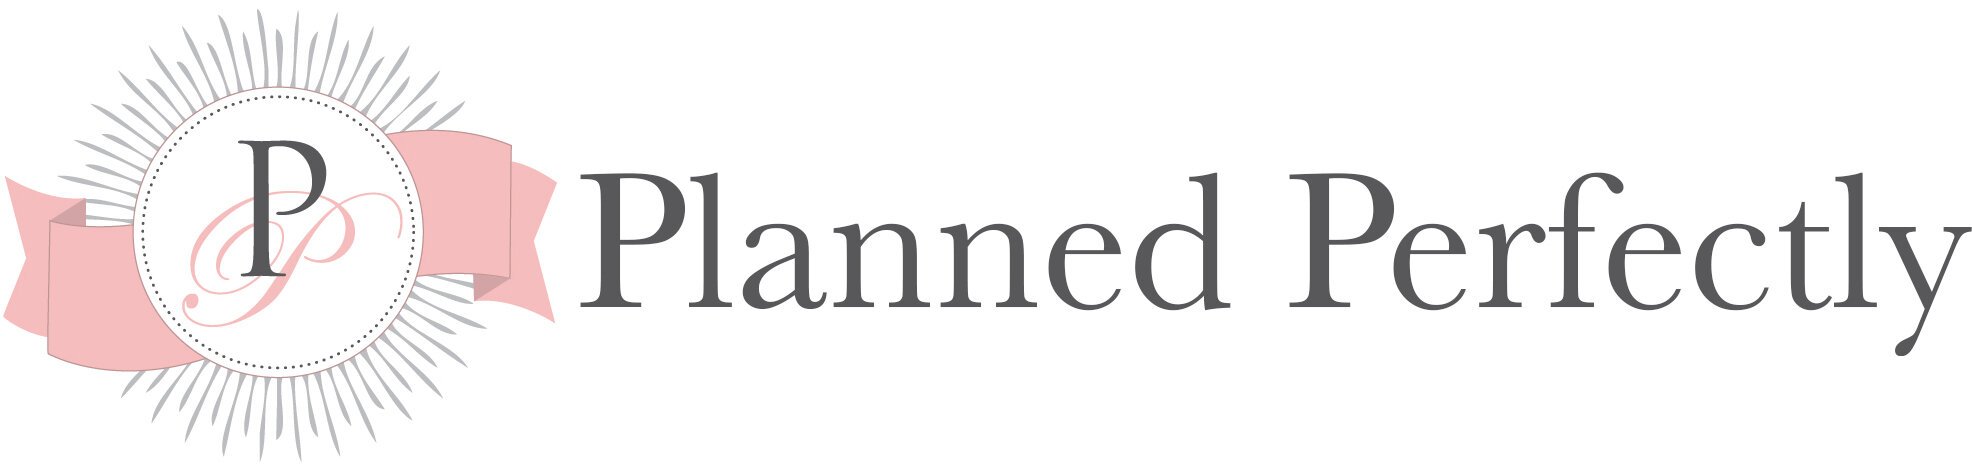 Planned+Perfectly+logowebsite